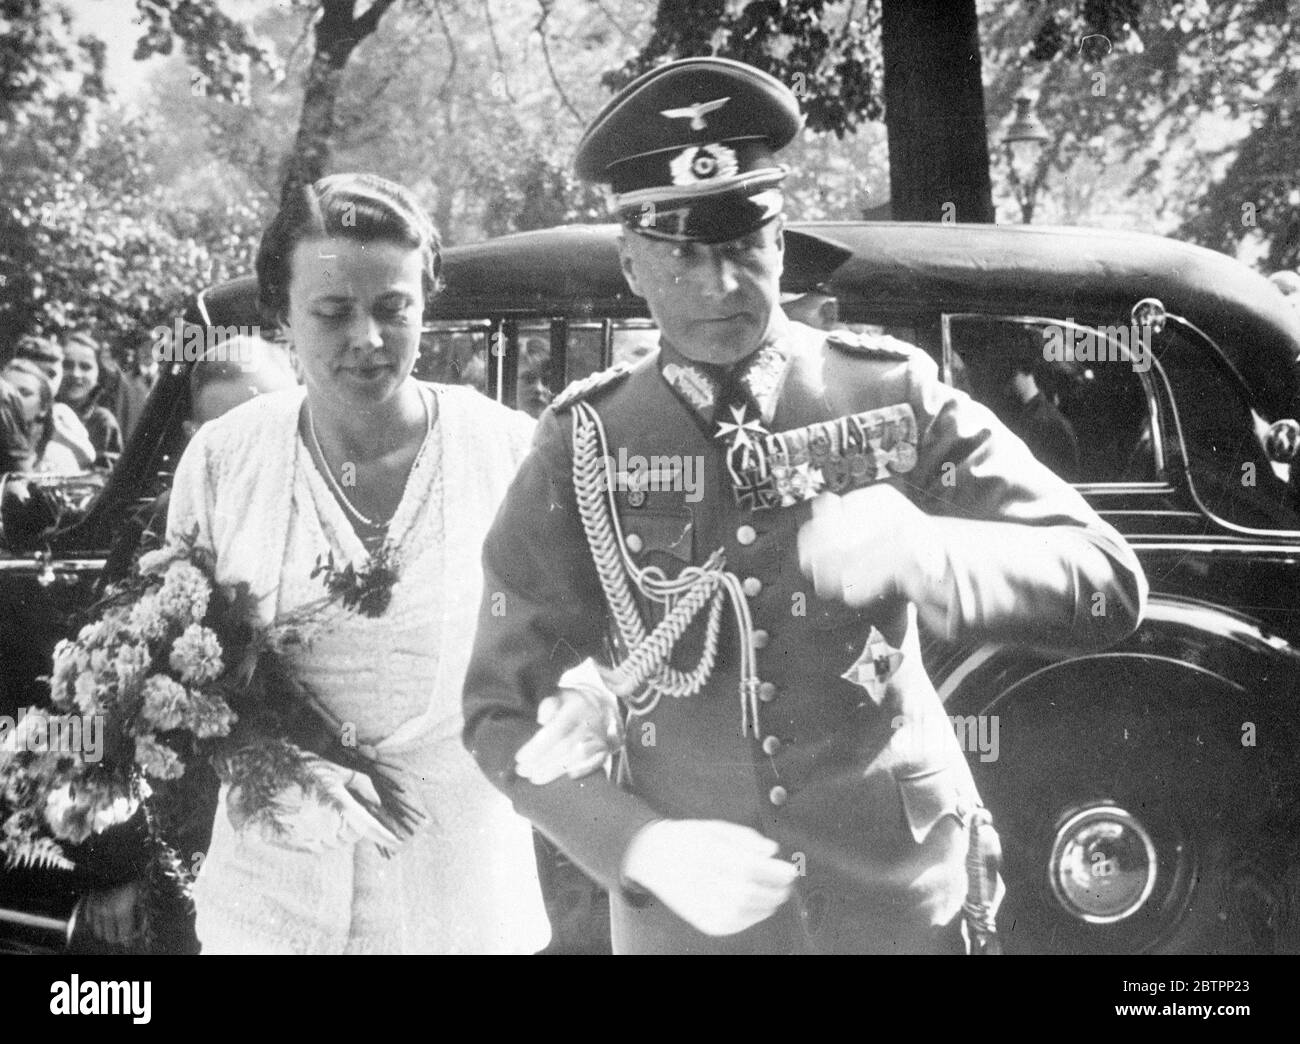 Germany's commander-in-chief married. Col General von Brauchitsch, the commander-in-chief of the German army, was married in the Evangelical Church in Bad Salzbrunn, Silesia. Photo shows, Col Gen von Brauchitsch with his bride after the wedding ceremony. 25 September 1938 Stock Photo